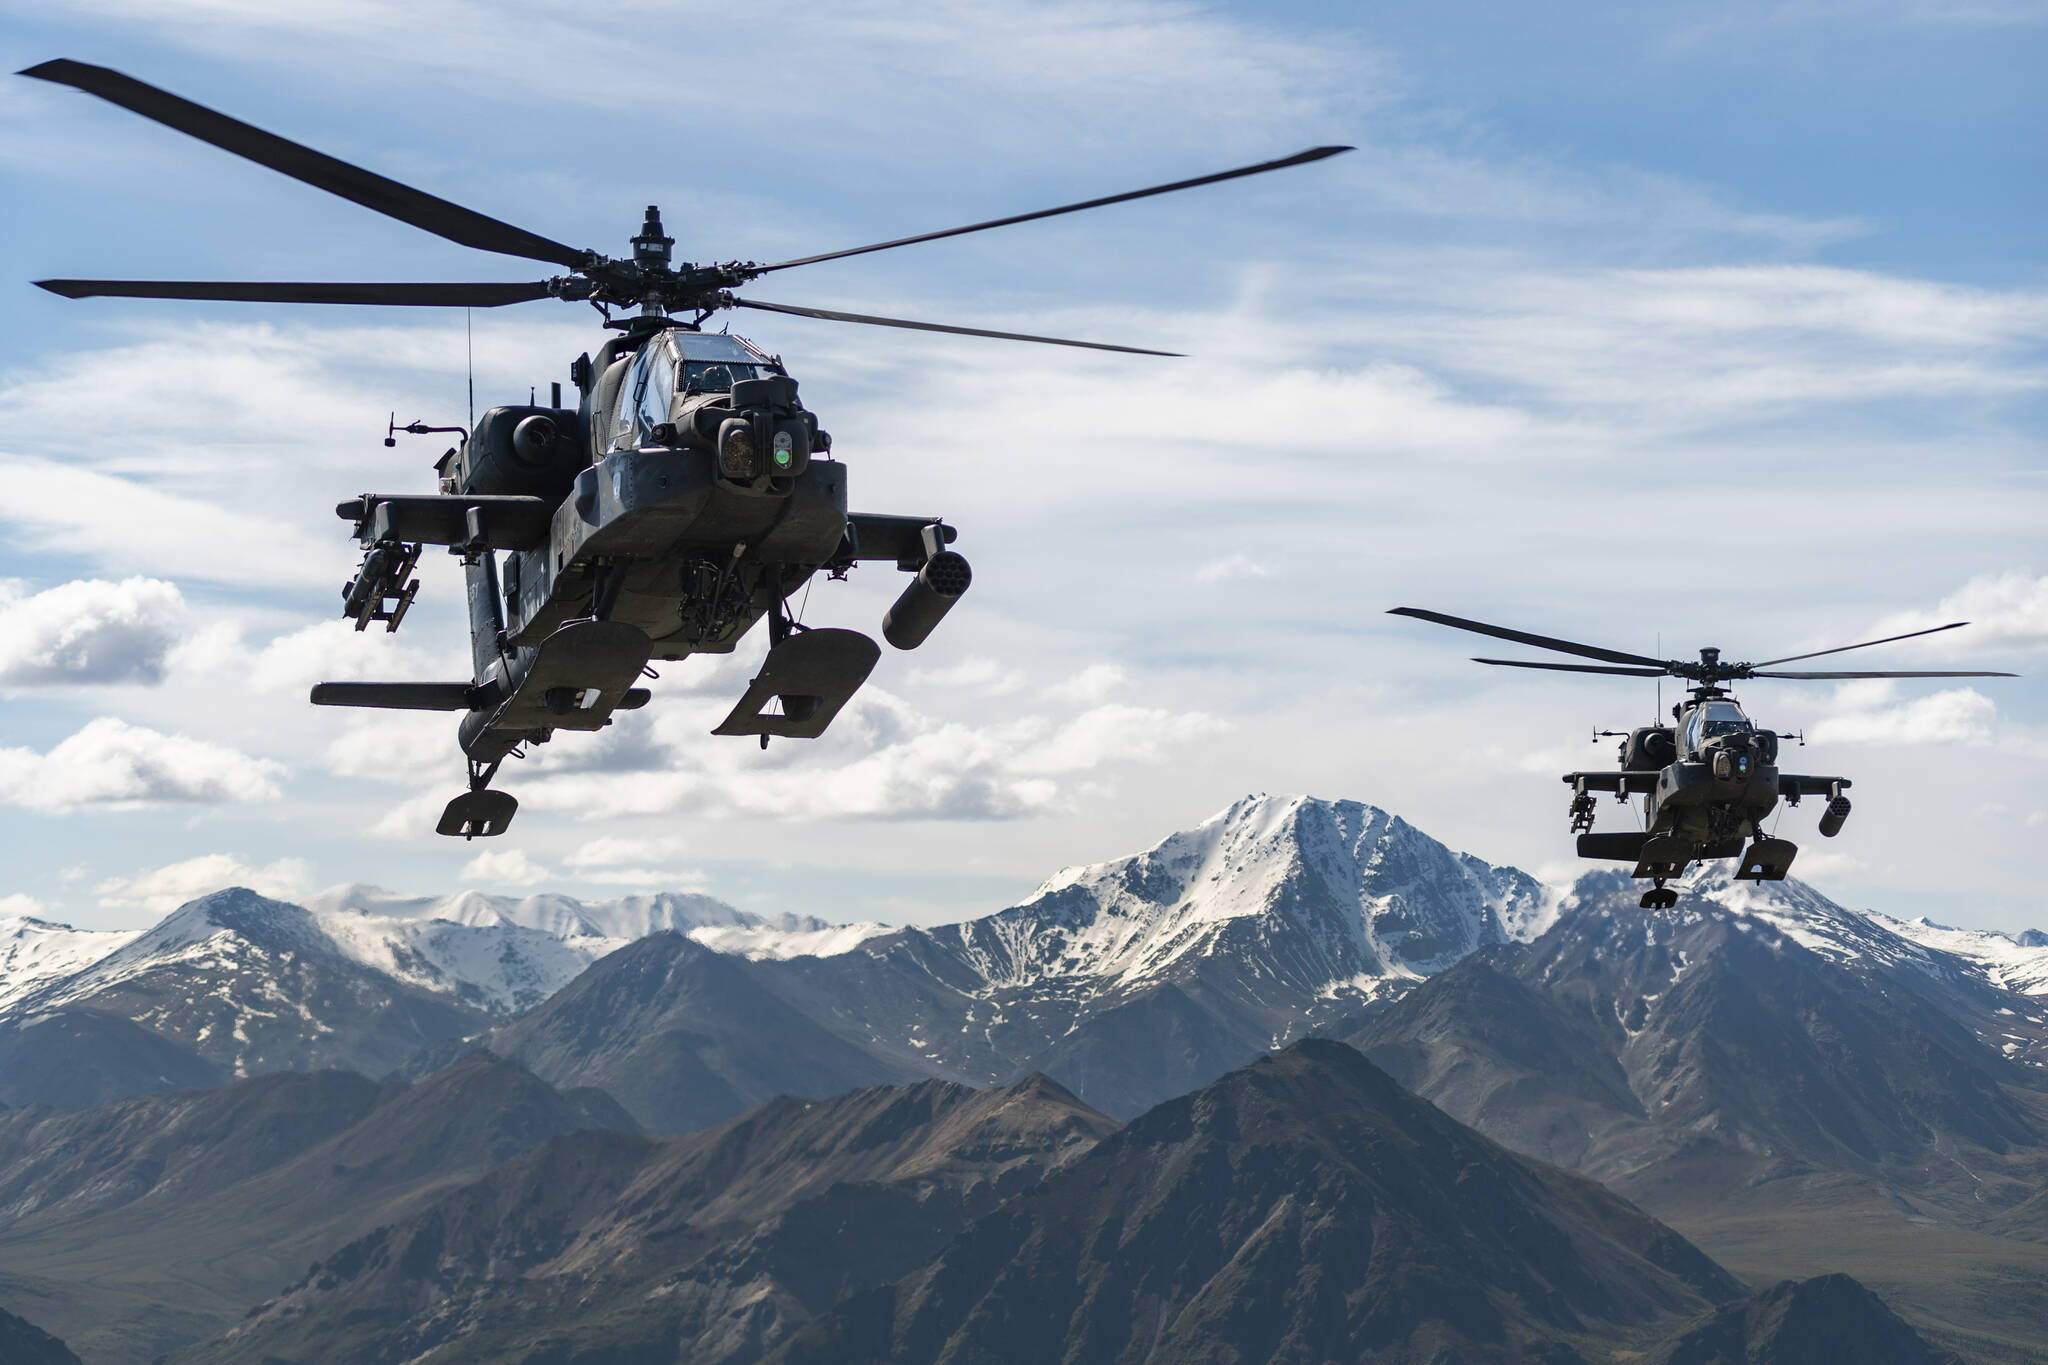 In this photo released by the U.S. Army, AH-64D Apache Longbow attack helicopters from the 1st Attack Battalion, 25th Aviation Regiment, fly over a mountain range near Fort Wainwright, Alaska, on June 3, 2019. The U.S. Army says two Army helicopters similar to the ones in this picture crashed Thursday, April 27, 2023, near Healy, Alaska, killing three soldiers and injuring a fourth. The helicopters were returning from a training flight to Fort Wainwright, based near Fairbanks. (Cameron Roxberry / U.S. Army)